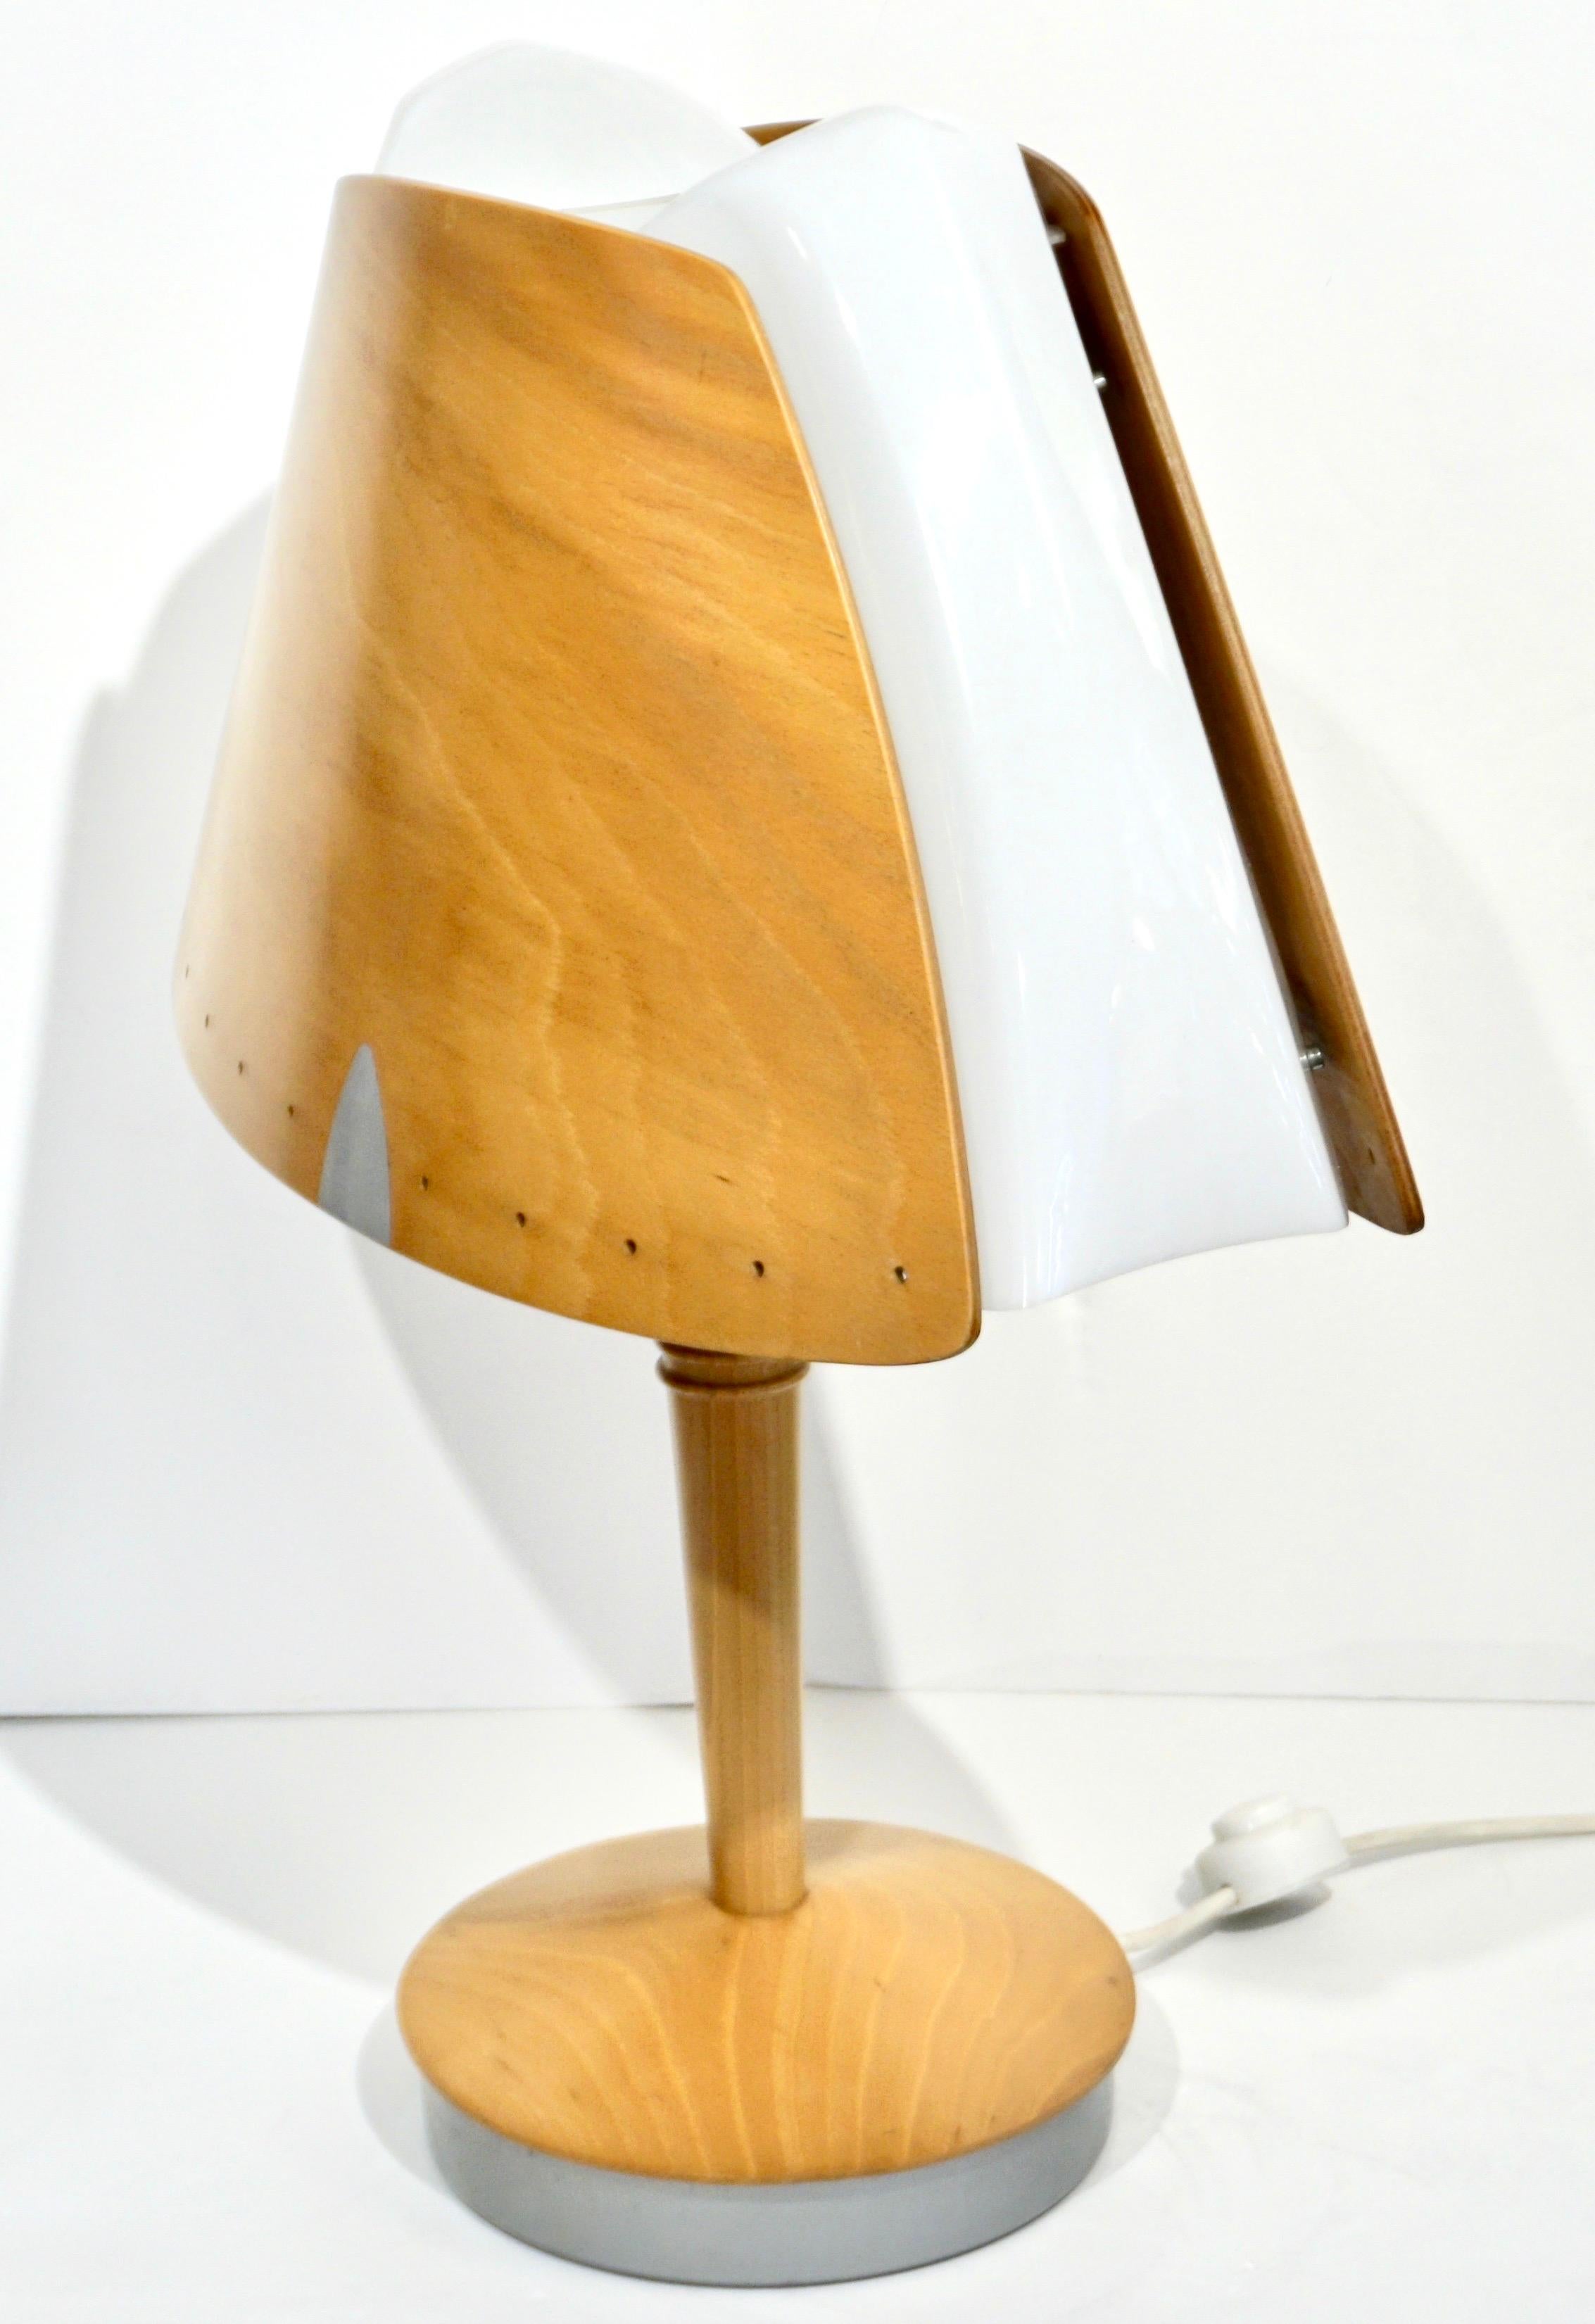 1970 French Vintage Birch Wood and Acrylic Table Lamp for Barcelona Hilton Hotel For Sale 8